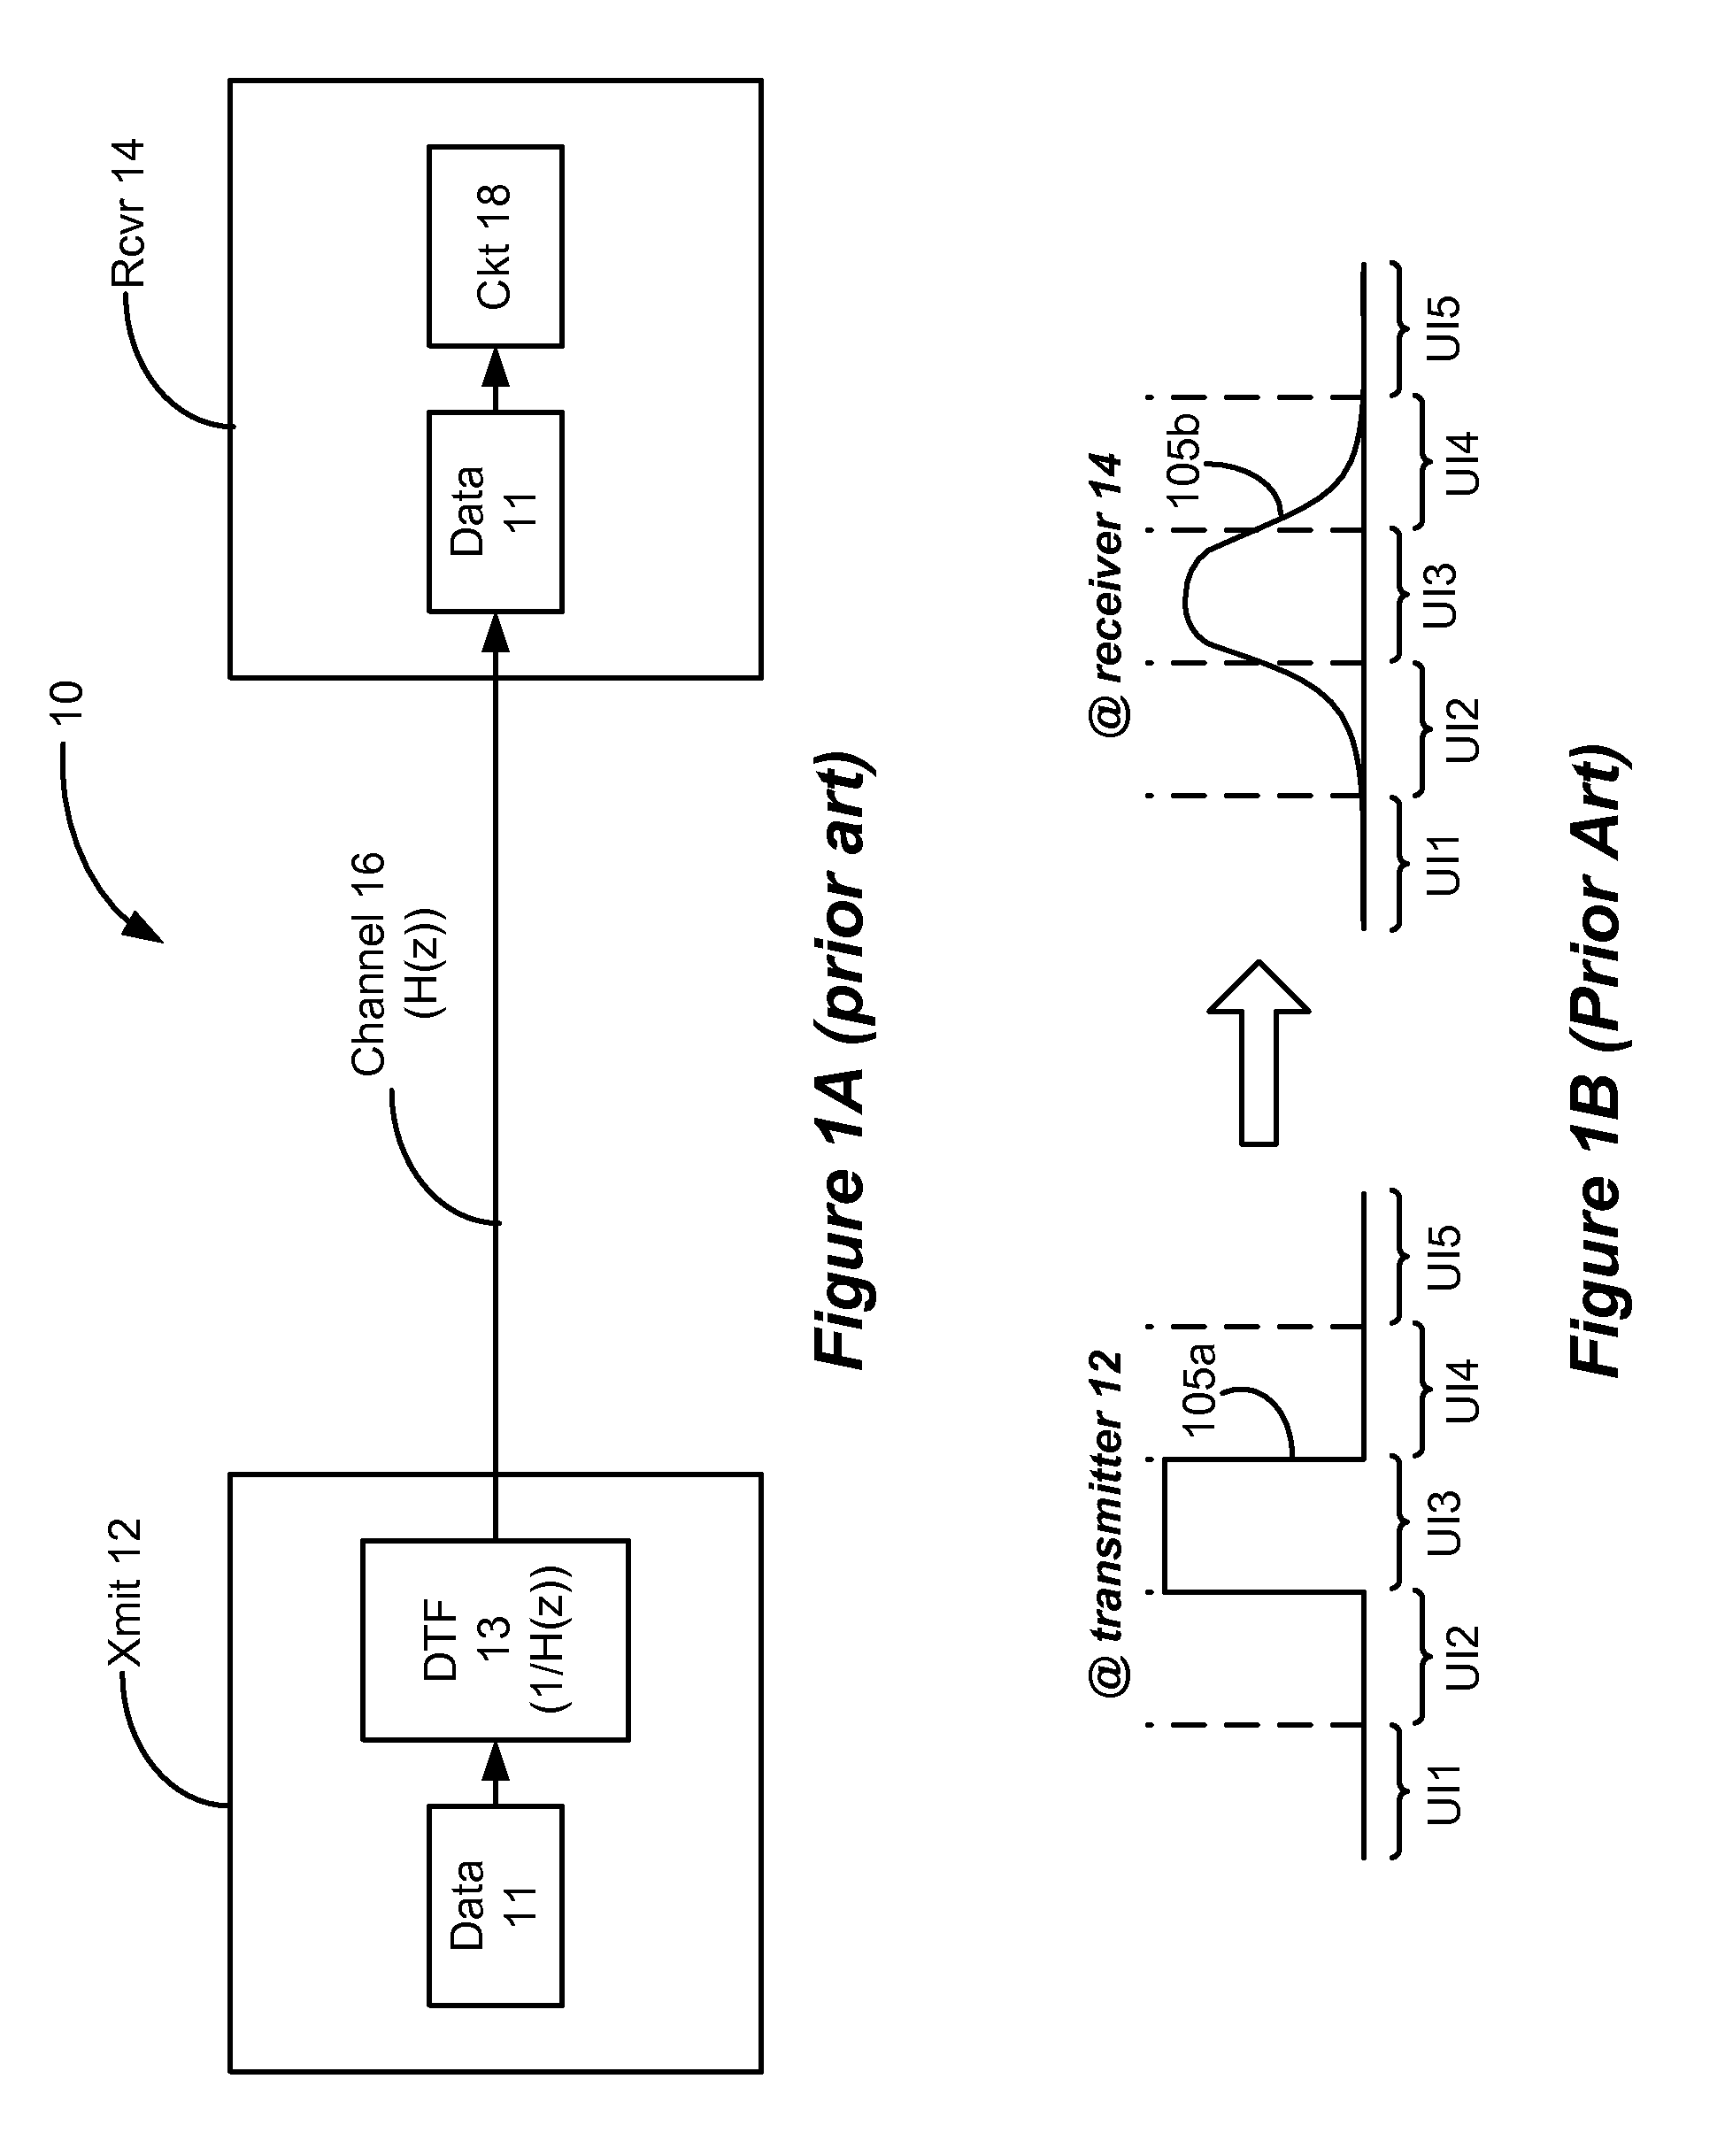 Jittery signal generation with discrete-time filtering